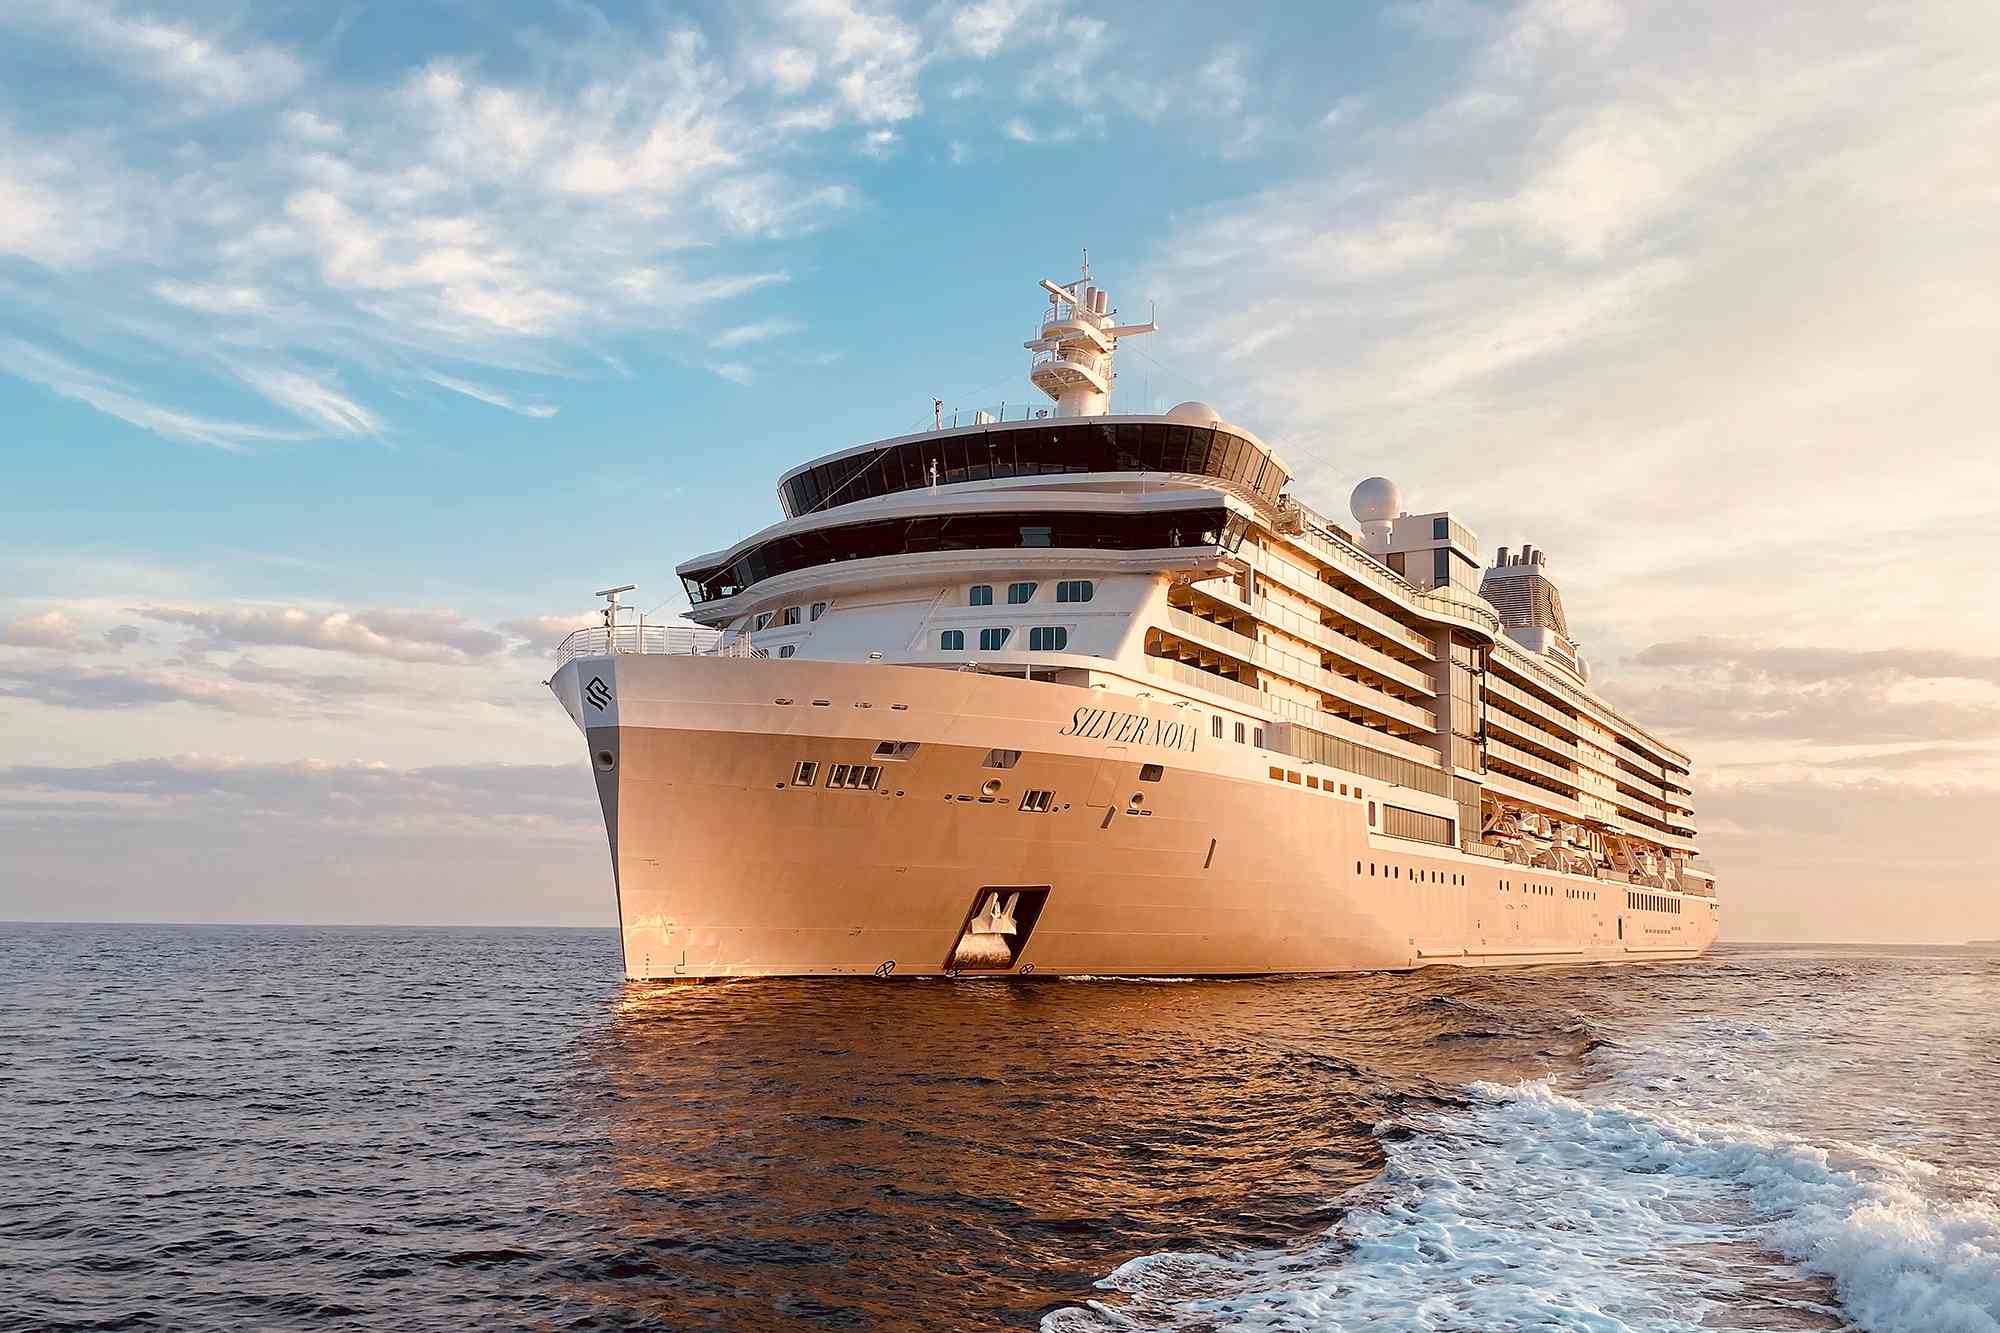 This New Cruise Ship Has an Unprecedented Design, Elegant Suites, and 'Quirky' Cocktails